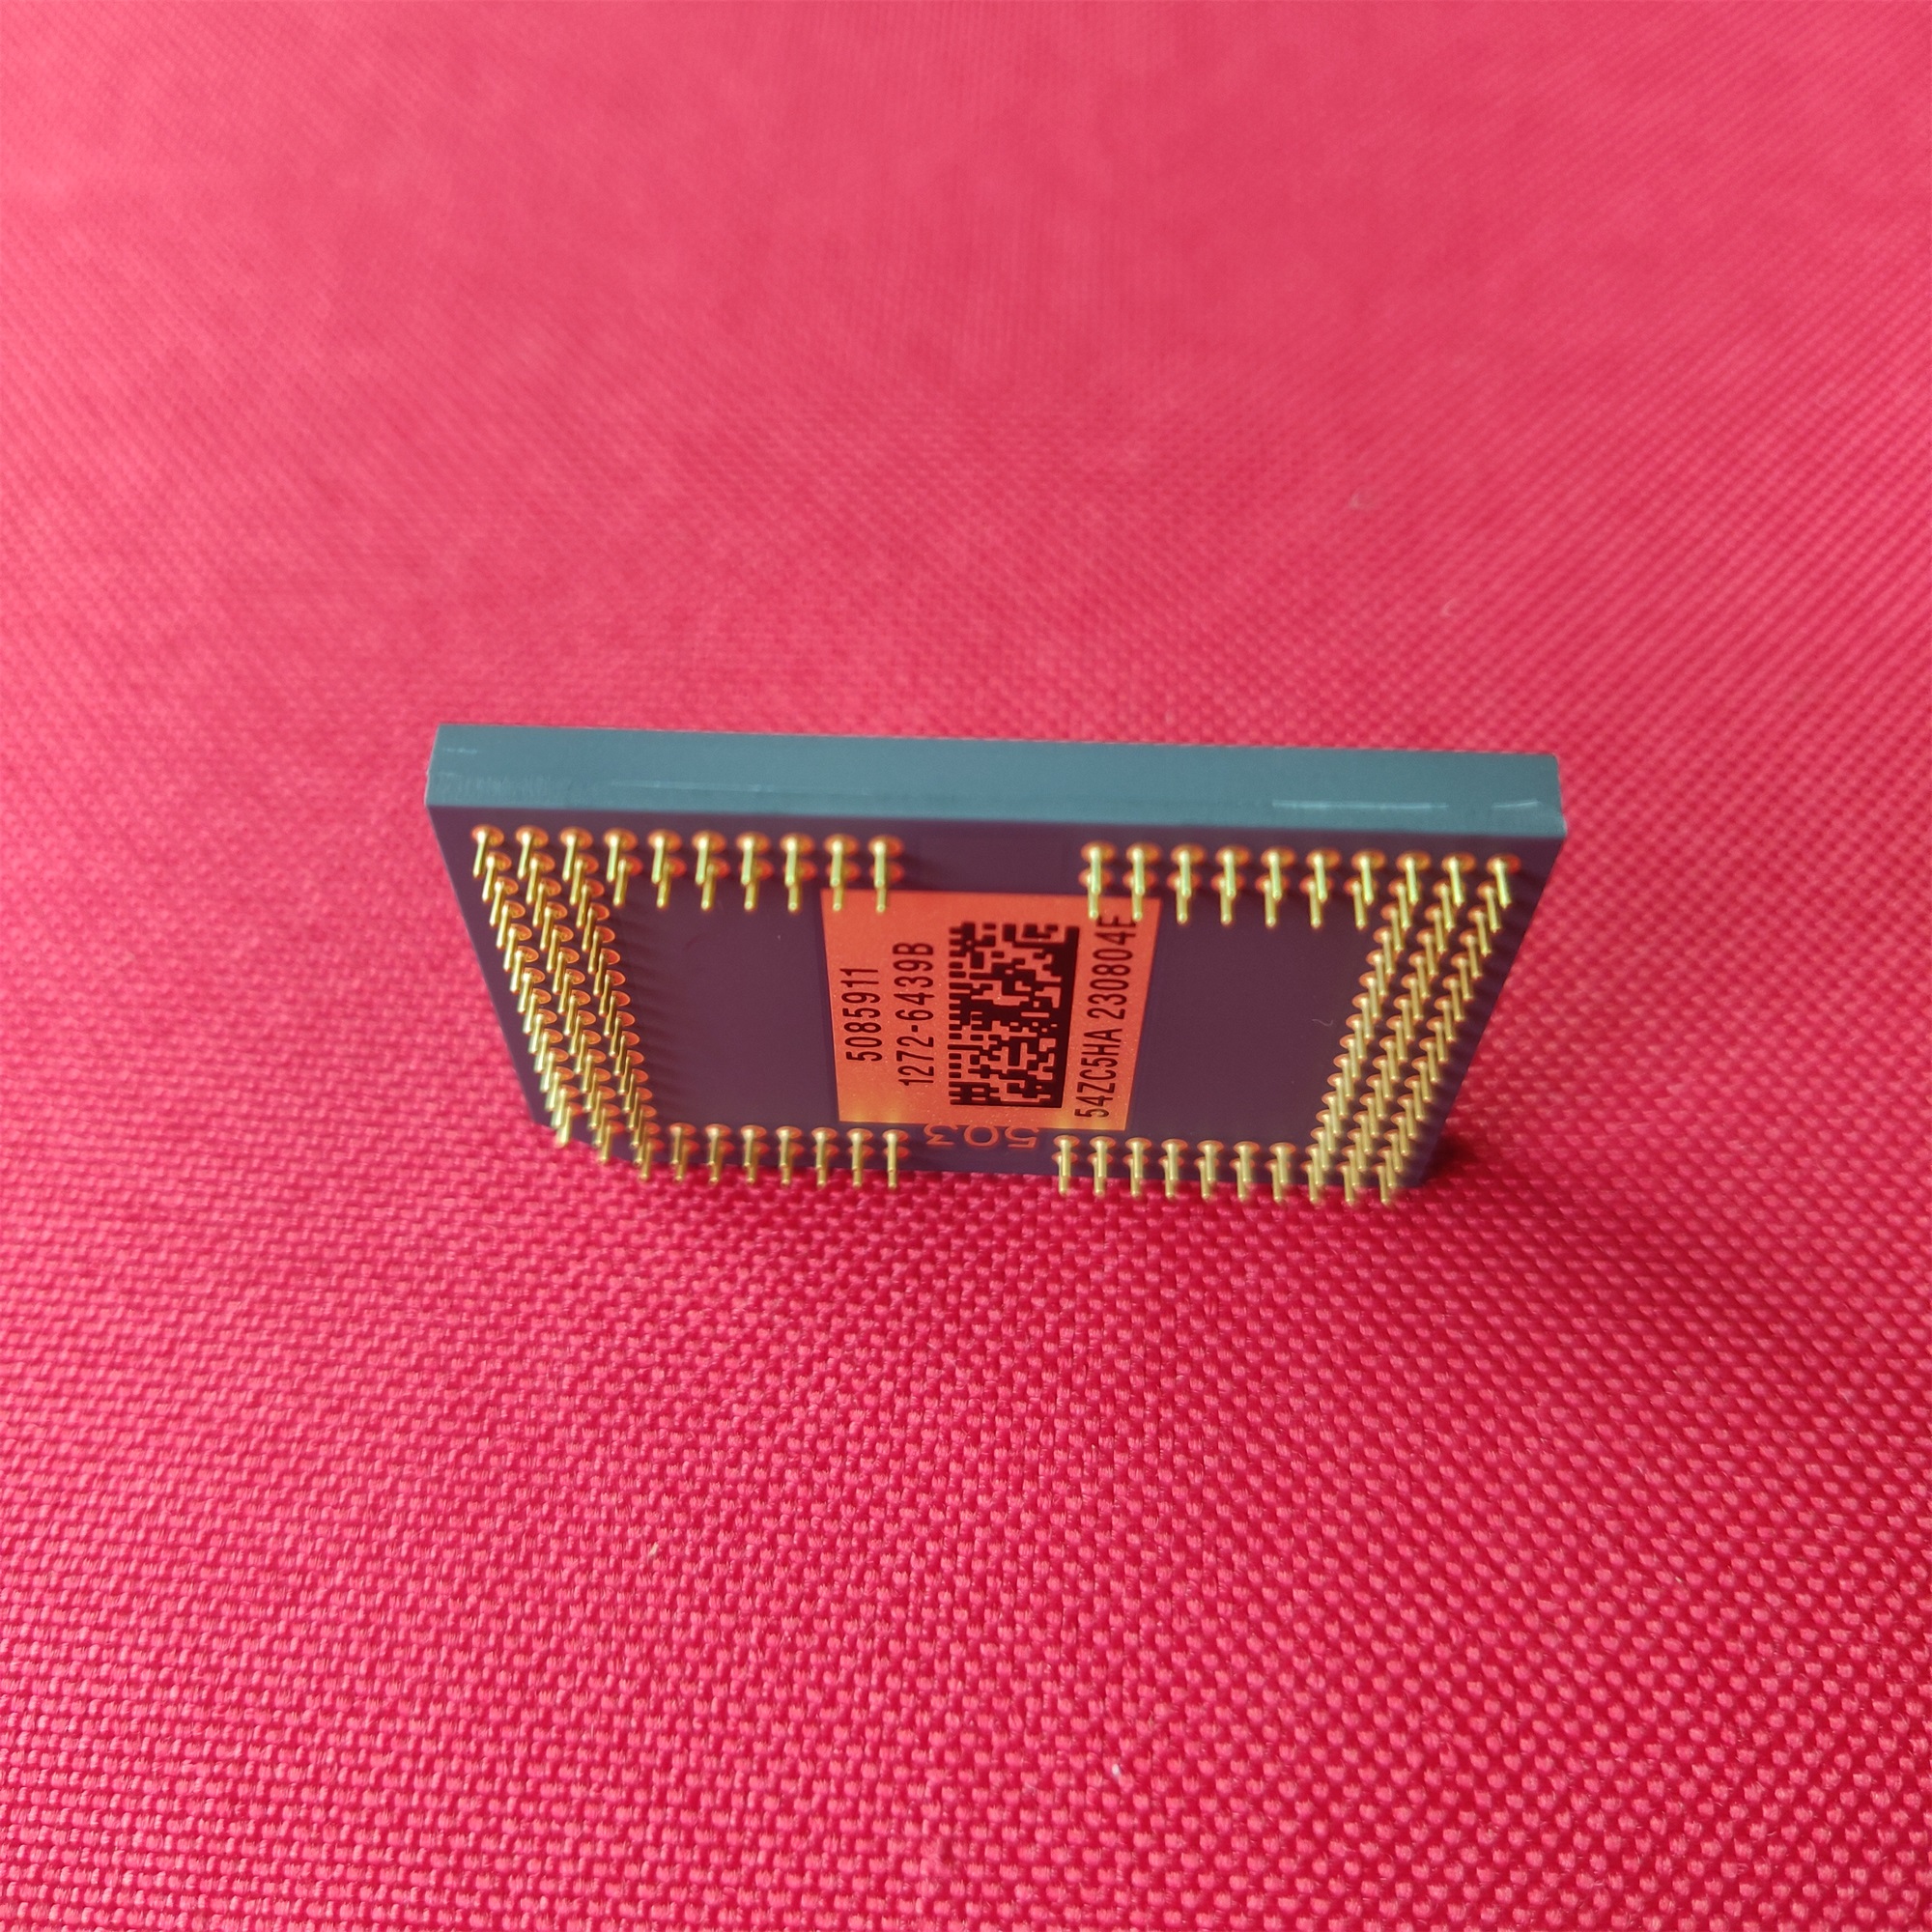 original NEW DMD chip 1272-6038B 1272-6039B 1272-6138B 1272-6139B 1272-6338B 1272-6339B 1272-6439B for optoma HD600x projector